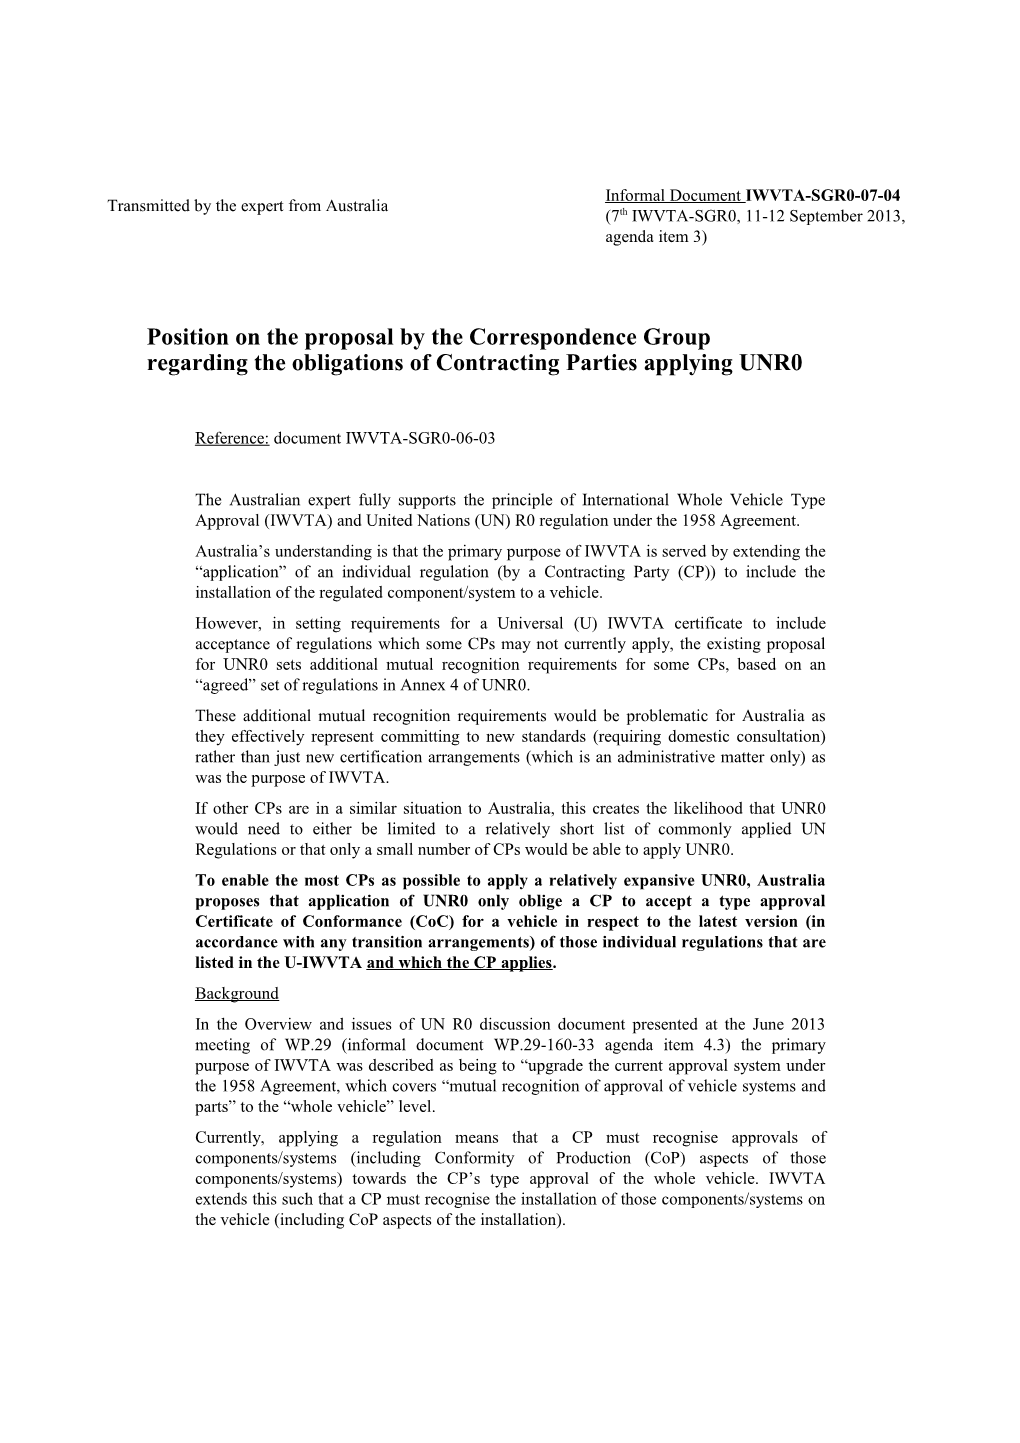 Position on the Proposal by the Correspondence Group Regarding the Obligations of Contracting